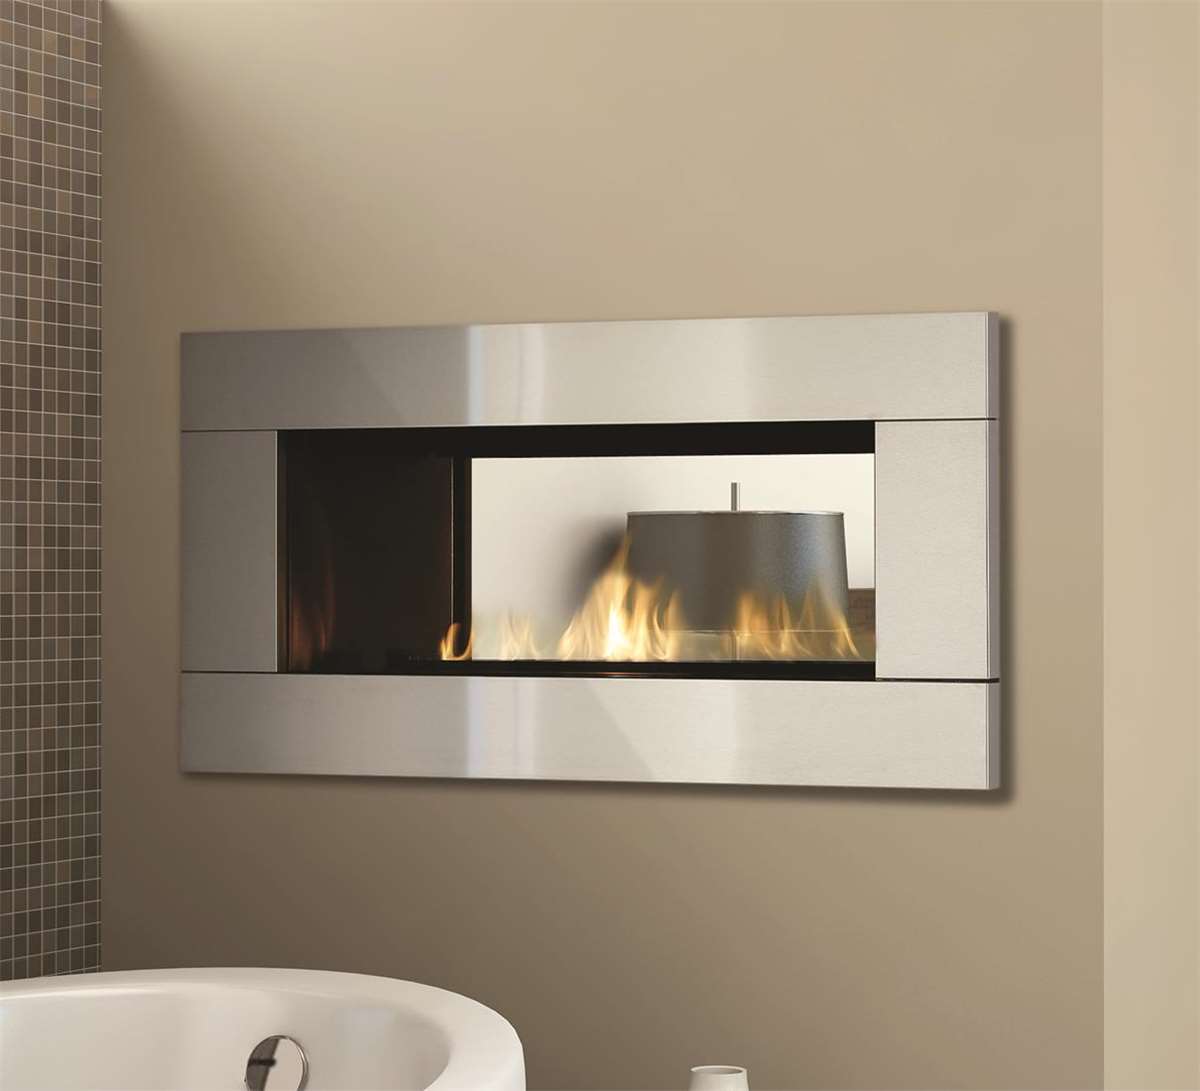 Horizon HZ42STE direct vent see-through gas fireplace with 4-piece stainless steel surround.